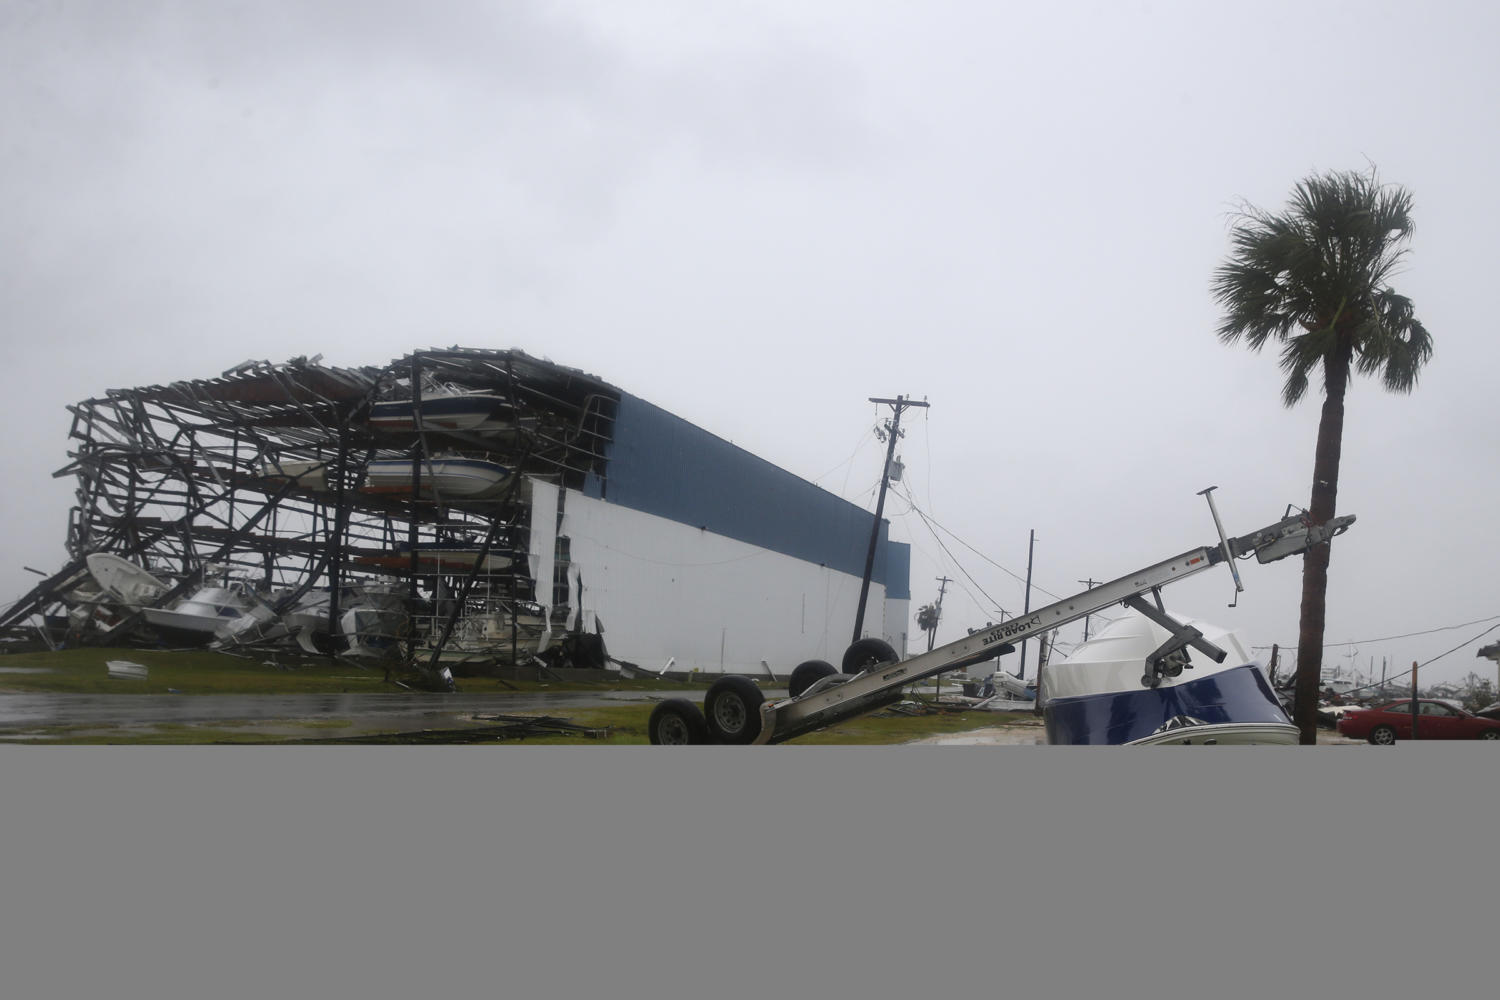 A large boat storage facility teeters on the brink of collapse after being ripped apart by Hurricane HarveyTexas in Rockport, Texas, on Saturday, Aug. 26, 2017. (Robert Gauthier/Los Angeles Times/TNS)